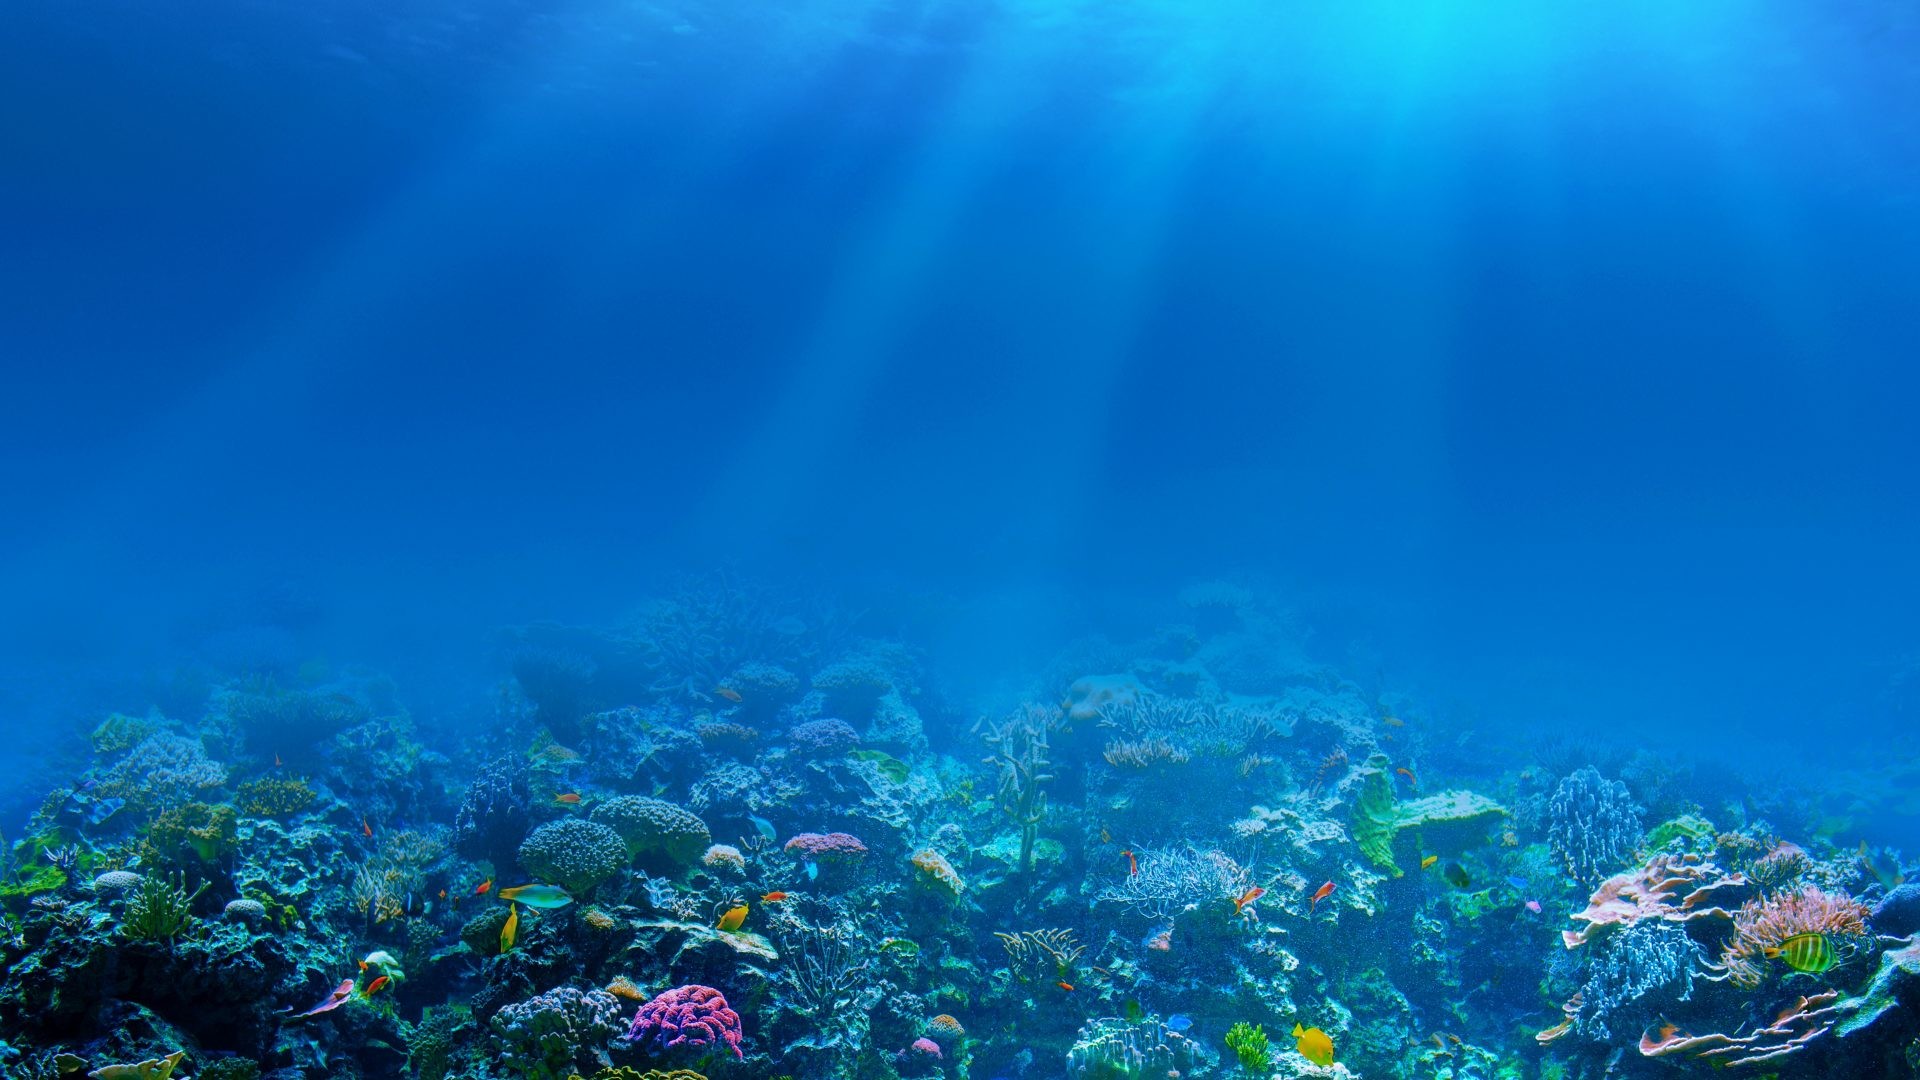 Underwater HD Wallpapers 1920x1080 (79+ images)